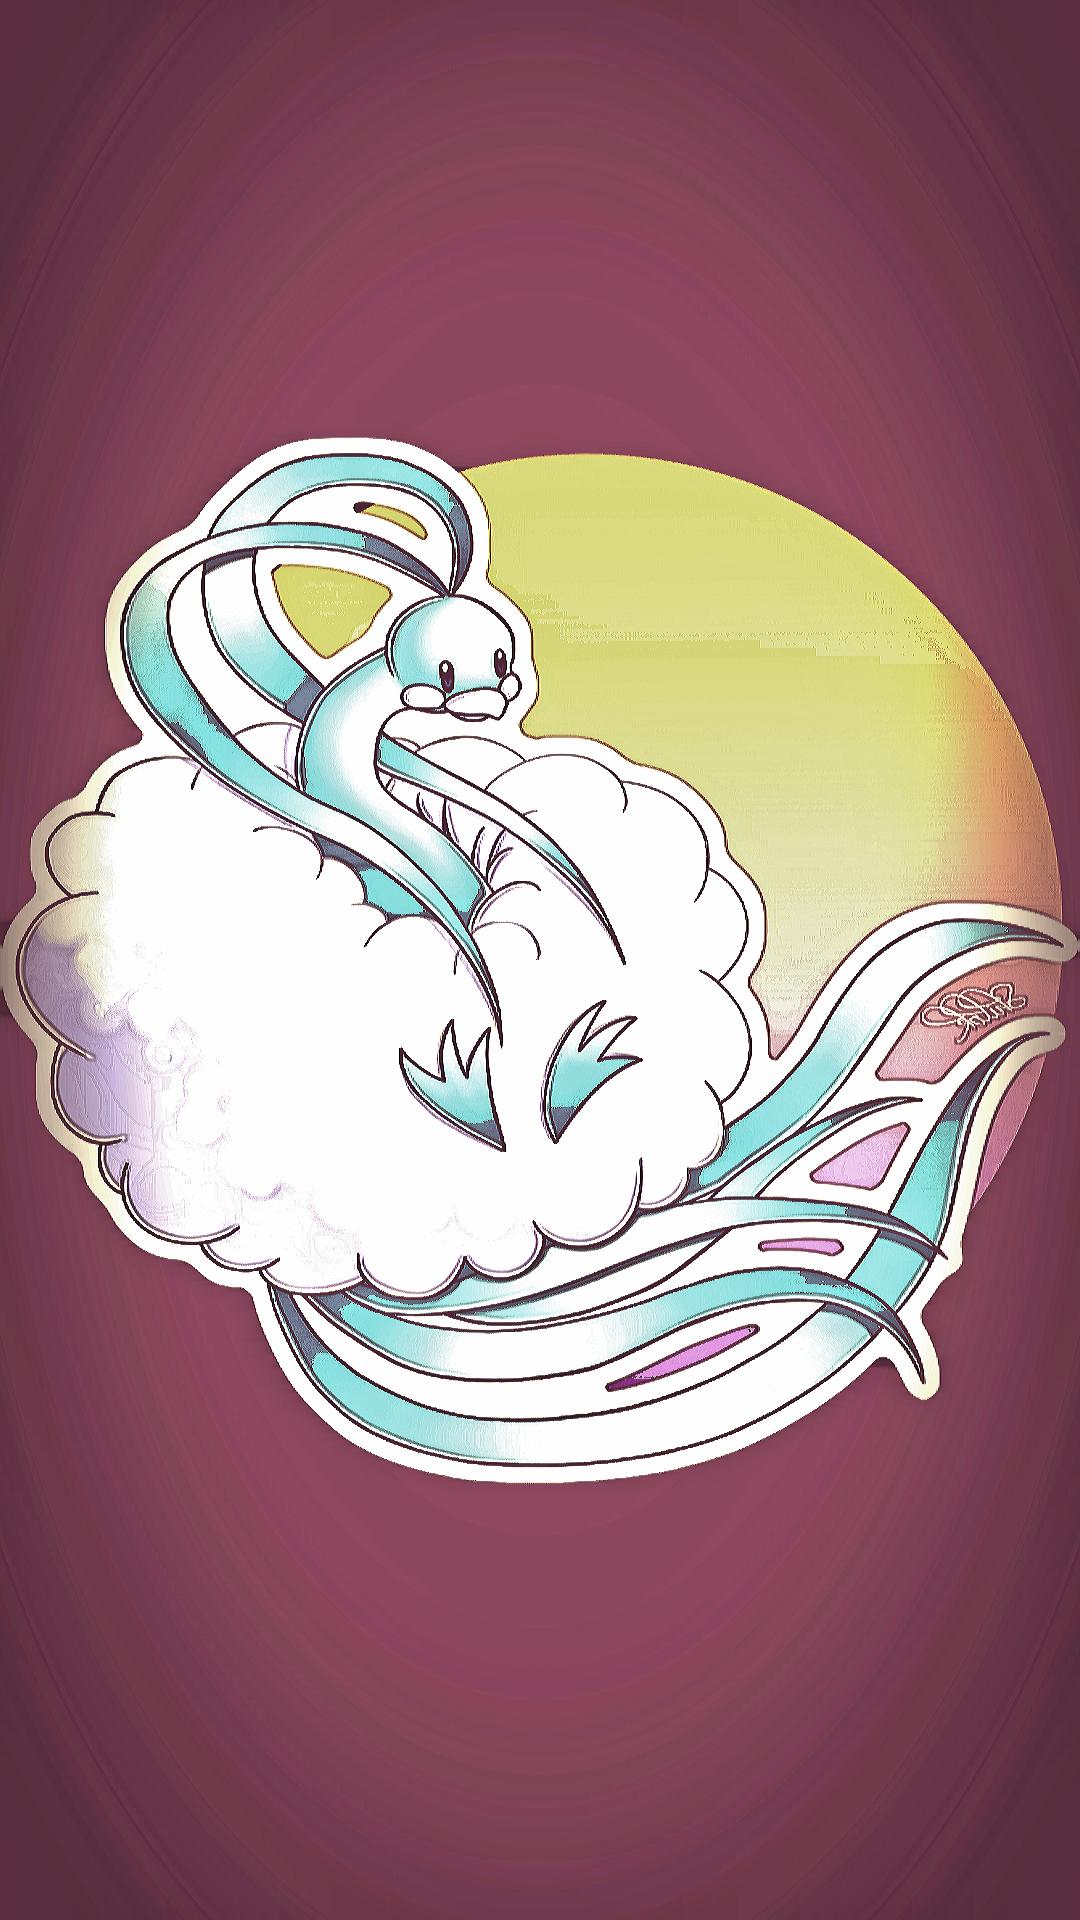 An edit of Altaria for a phone wallpaper, requested by Tolstar : pokemon